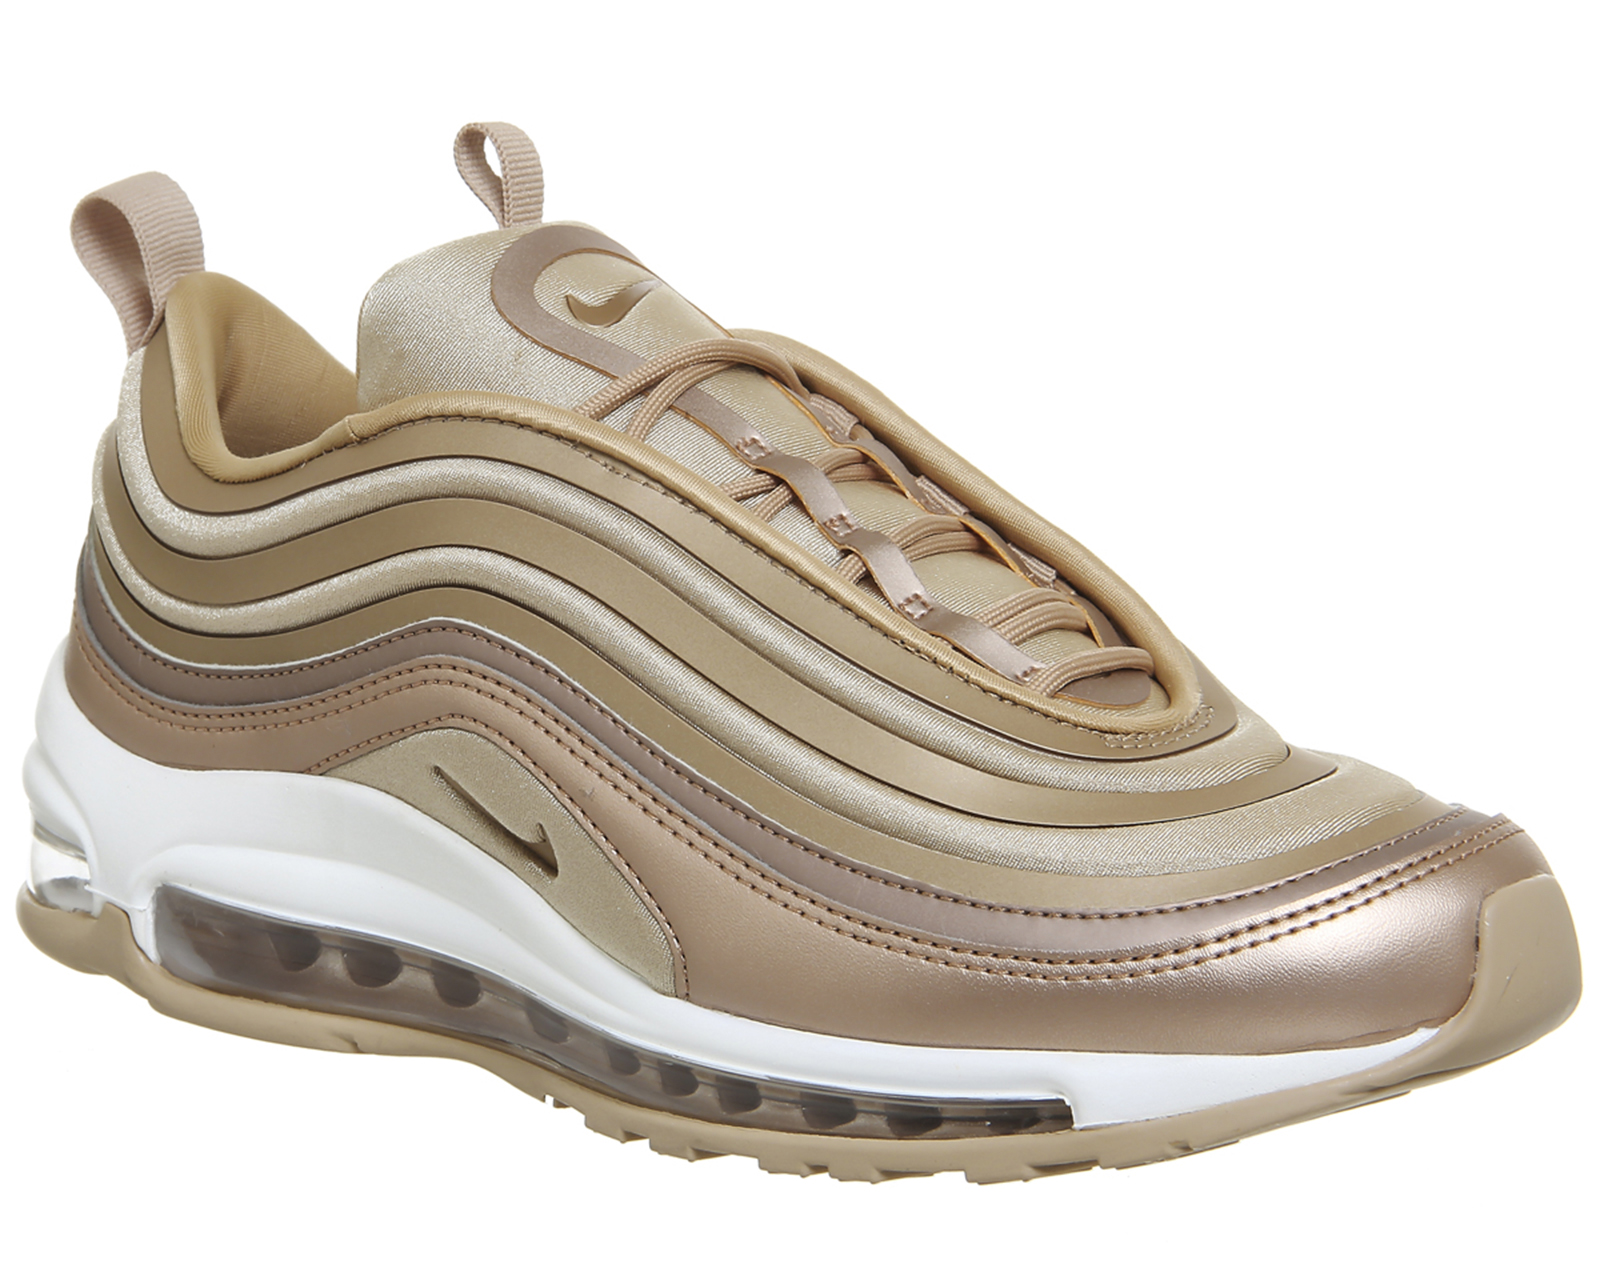 Nike Air Max 97 Ul Rose Gold - Hers trainers